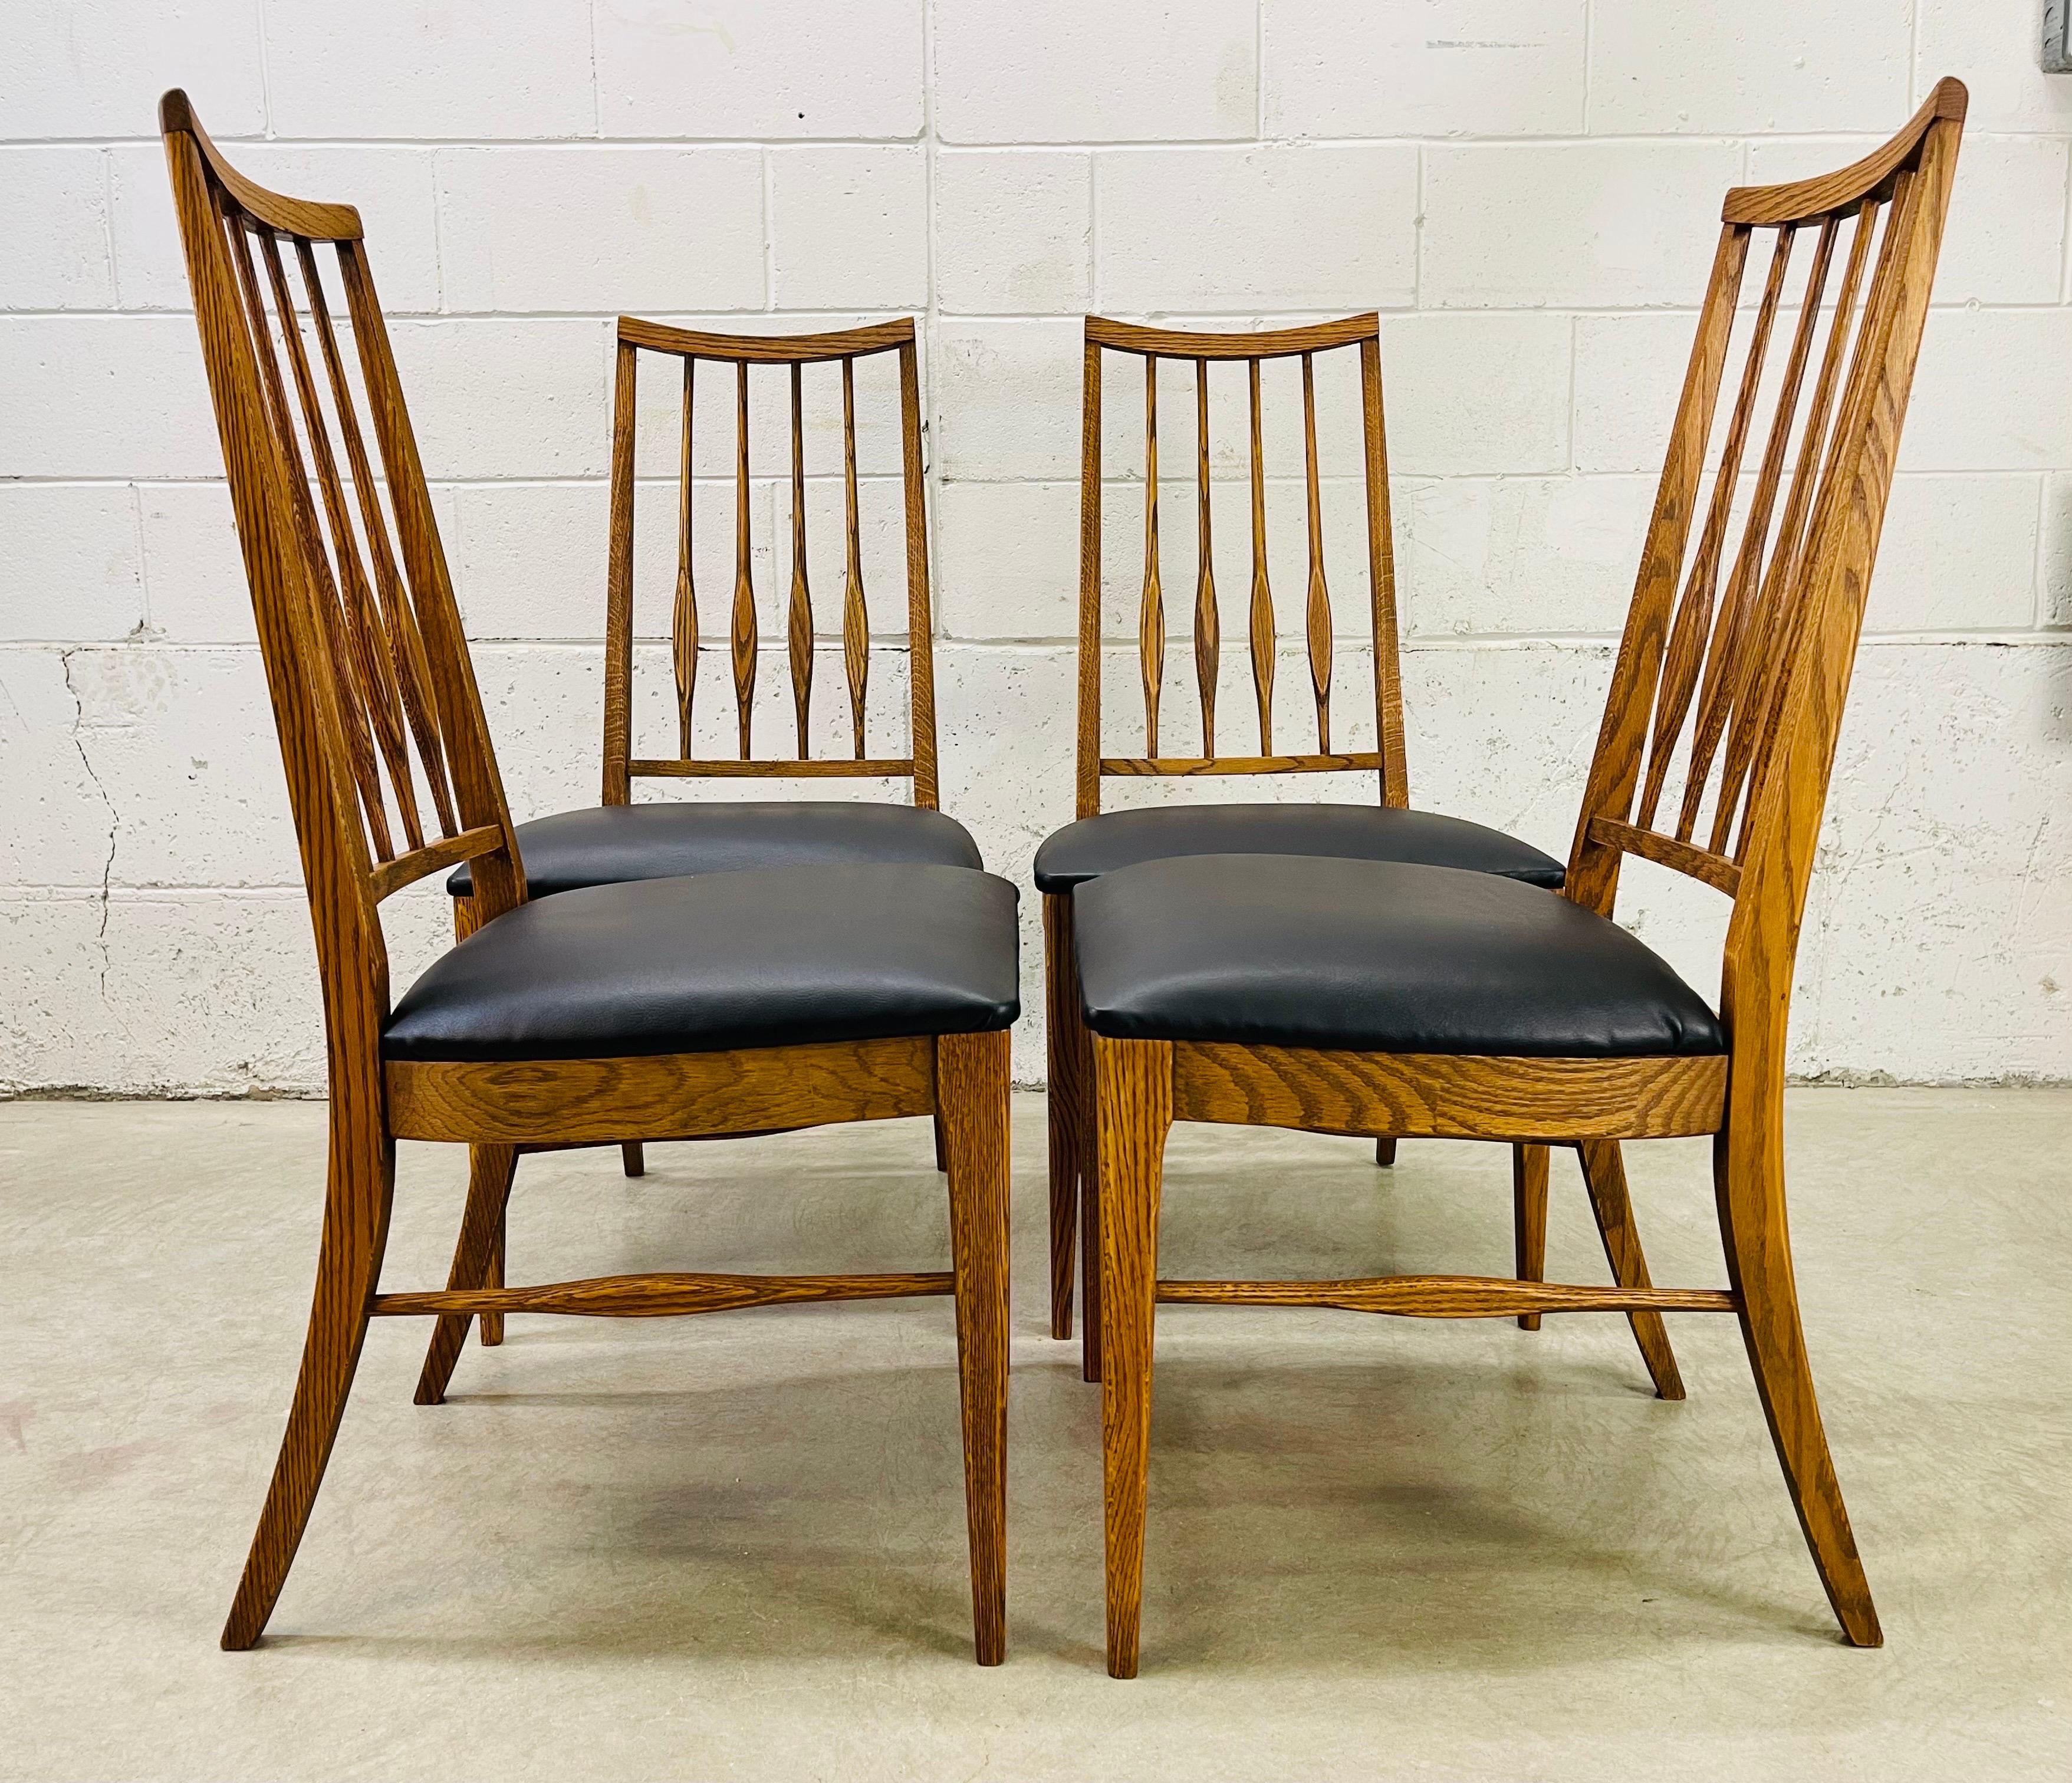 1960s High-Back Dining Chairs, Set of 4 In Good Condition For Sale In Amherst, NH